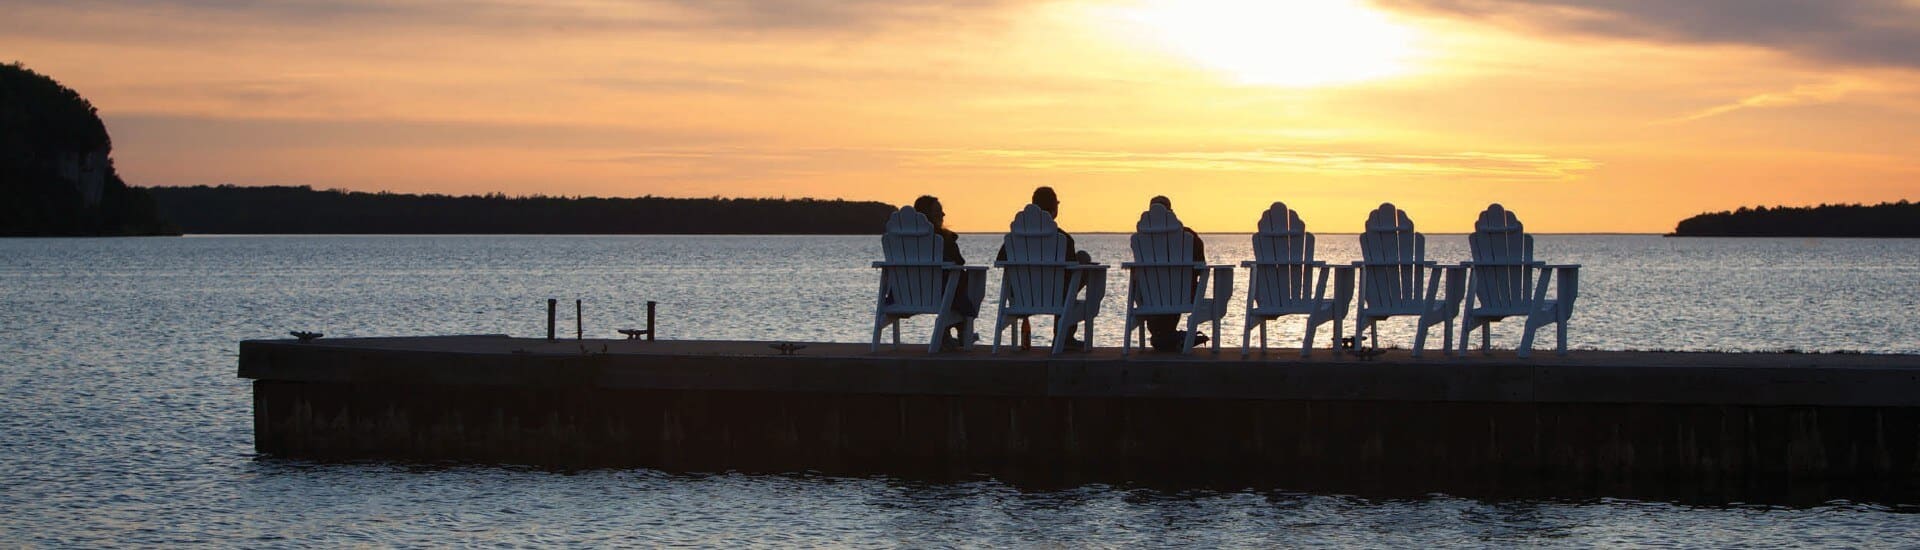 Six Adirondack chairs at the edge of a dock overlooking a body of water at sunset